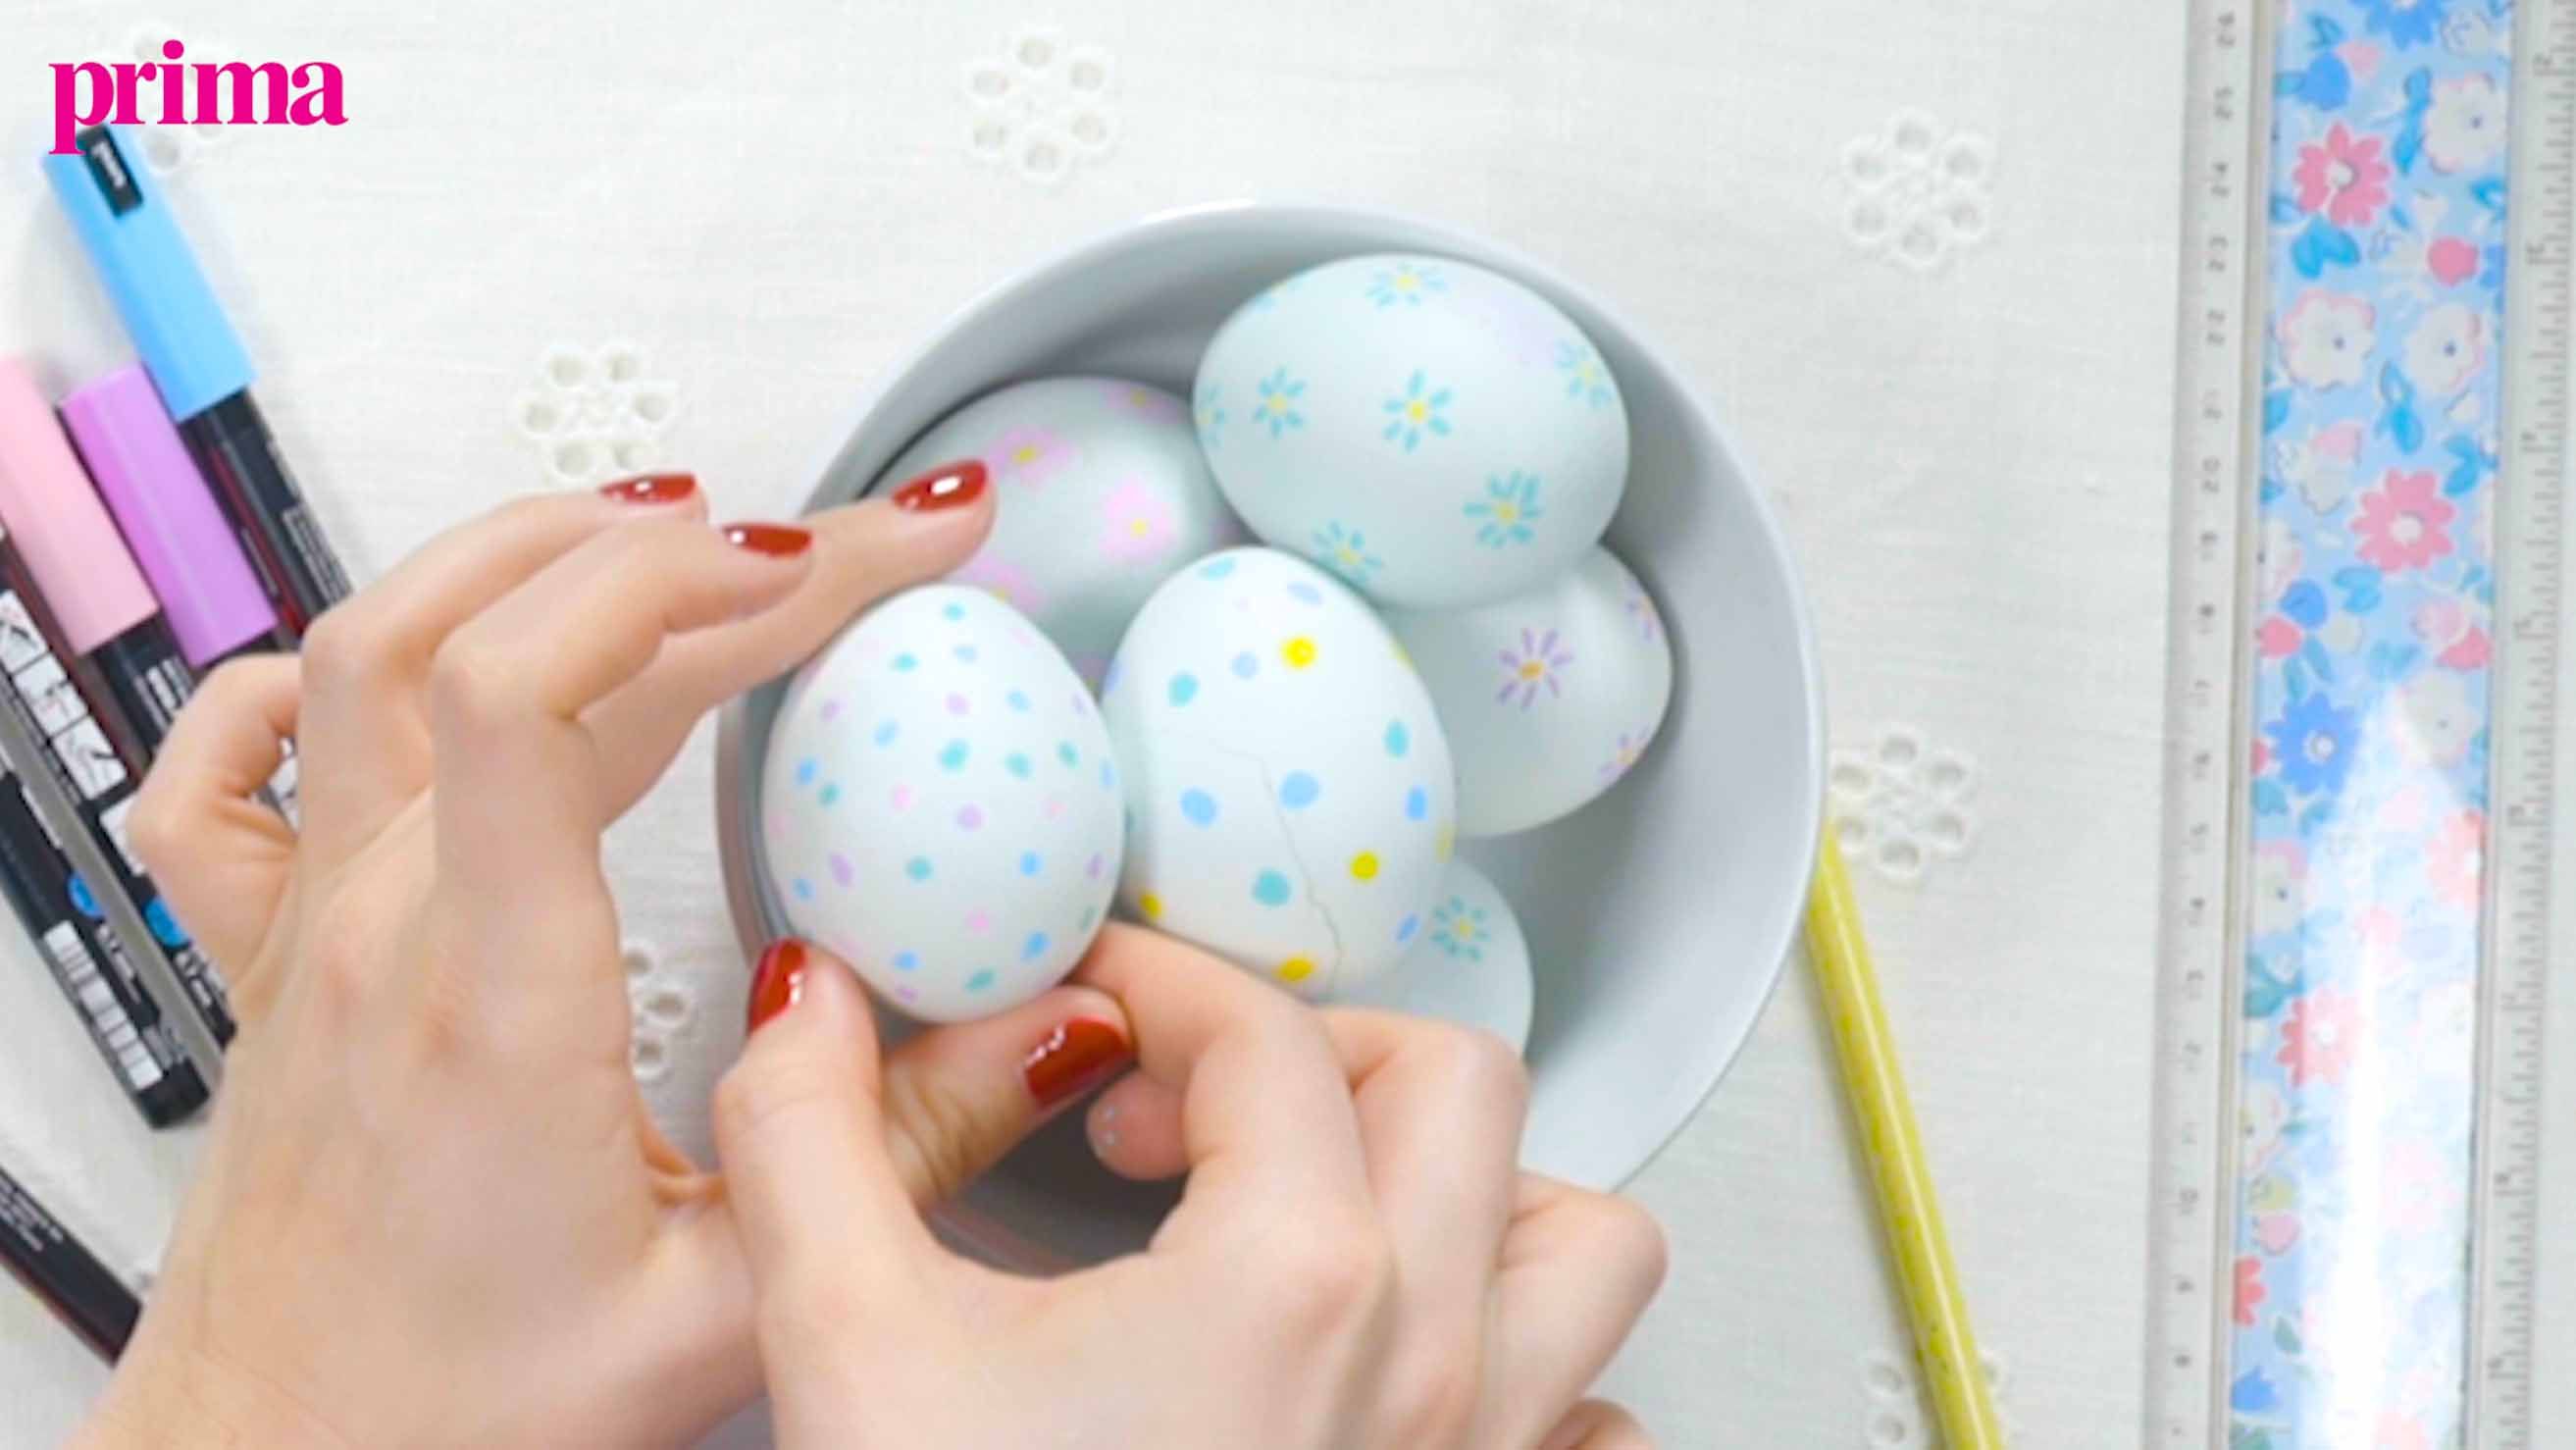 The Ultimate List of Easter Egg Crafts for Preschoolers